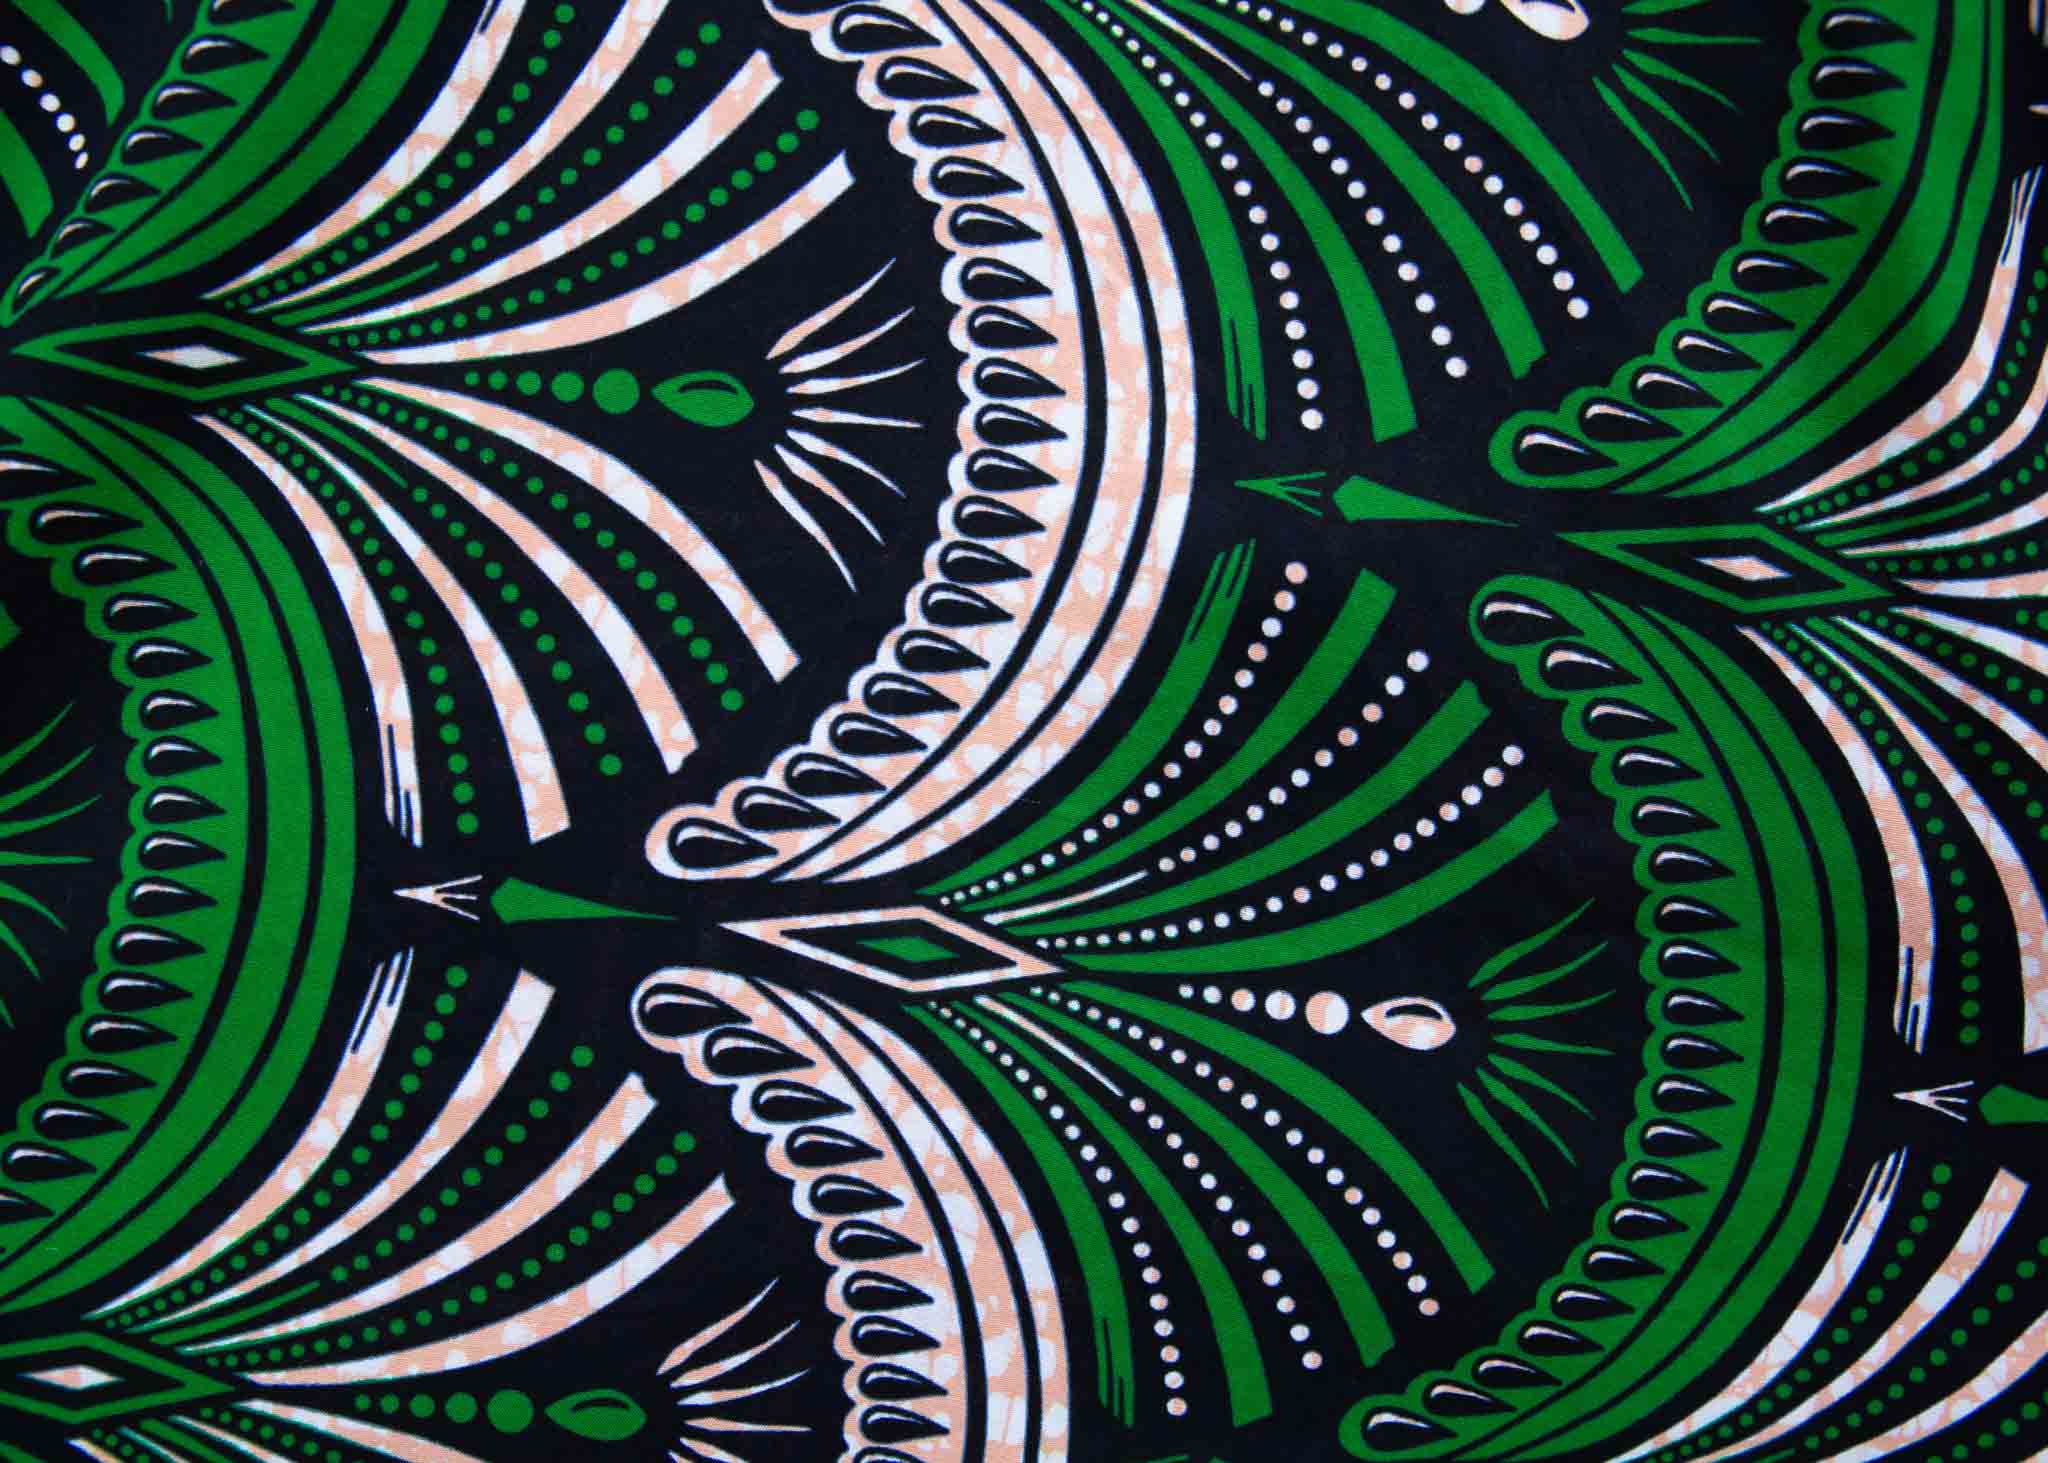 Display of green, white and black abstract print dress.